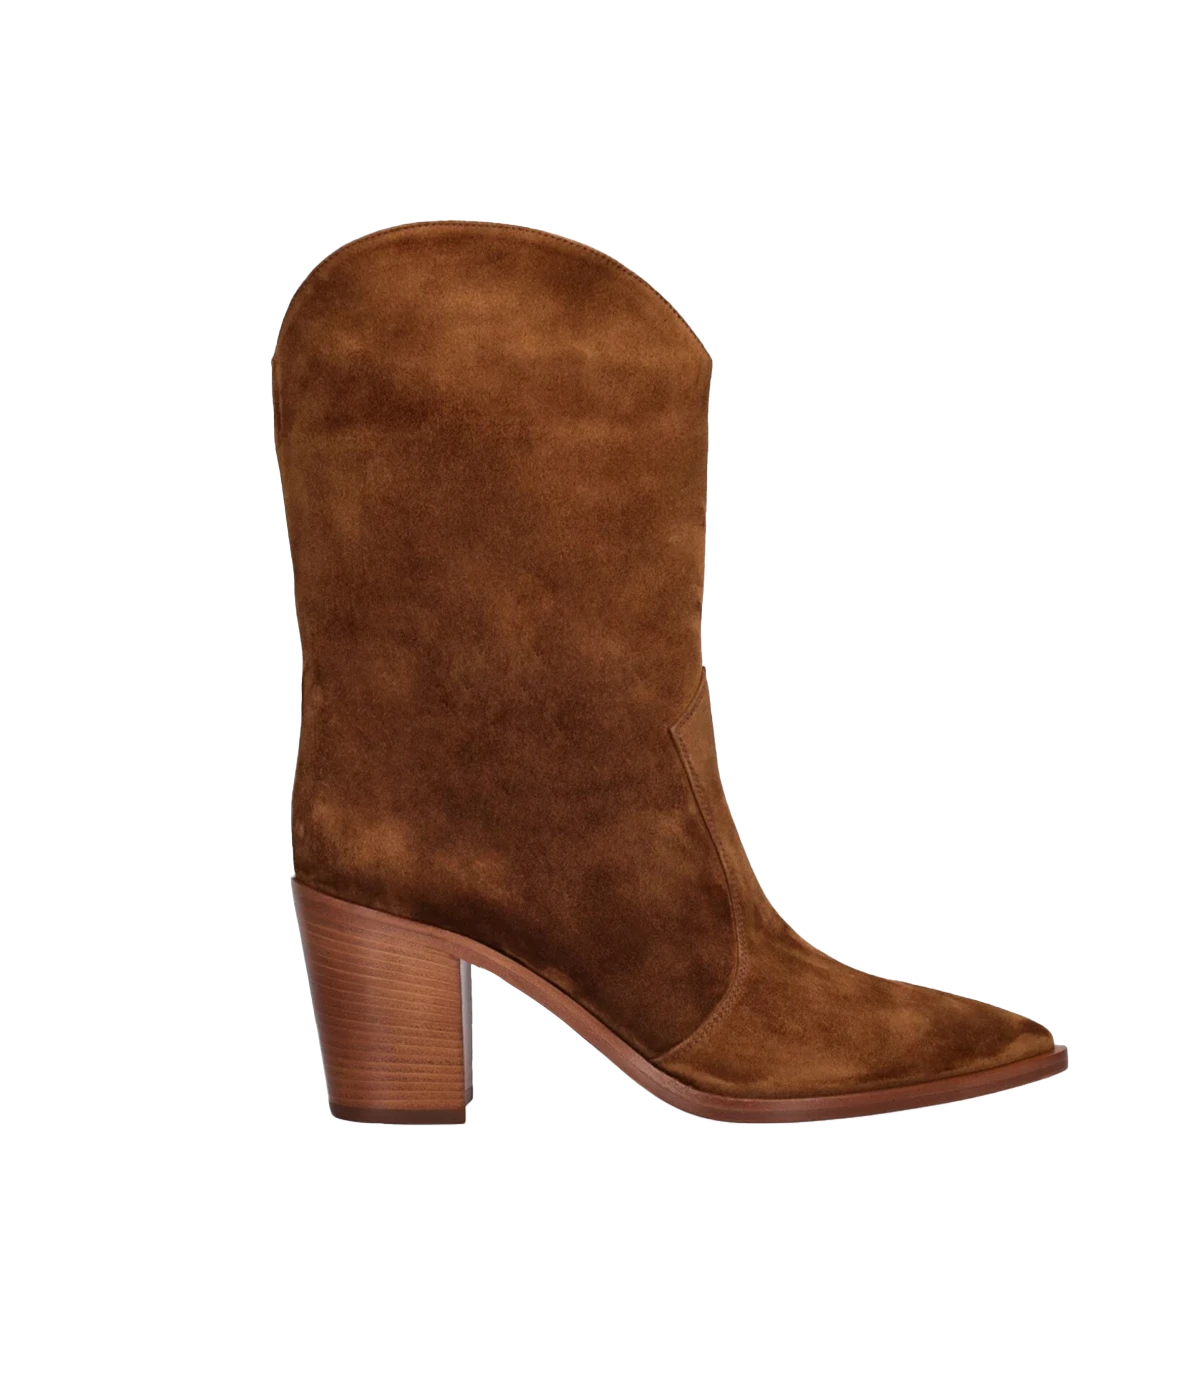 A cowboy style ankle boot, crafted from soft camel suede leather. Comfortable mid-block heel and pointed toe, slip on style boot. Add a hint of western flair to any outfit. 